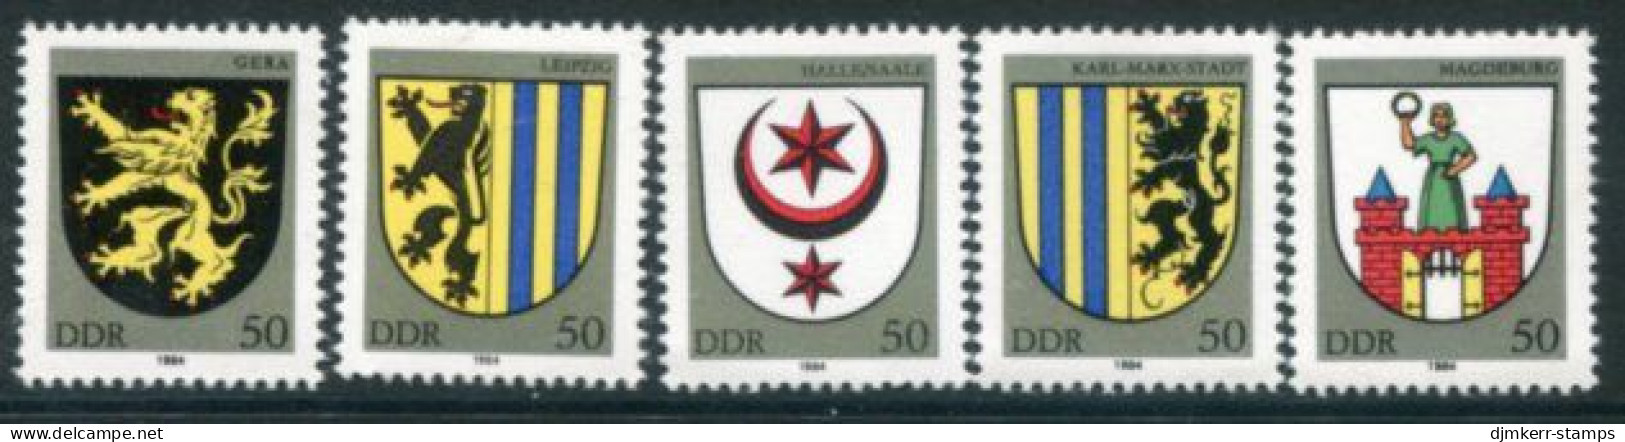 DDR 1984 Town Arms II MNH / **.  Michel 2857-61 - Unused Stamps